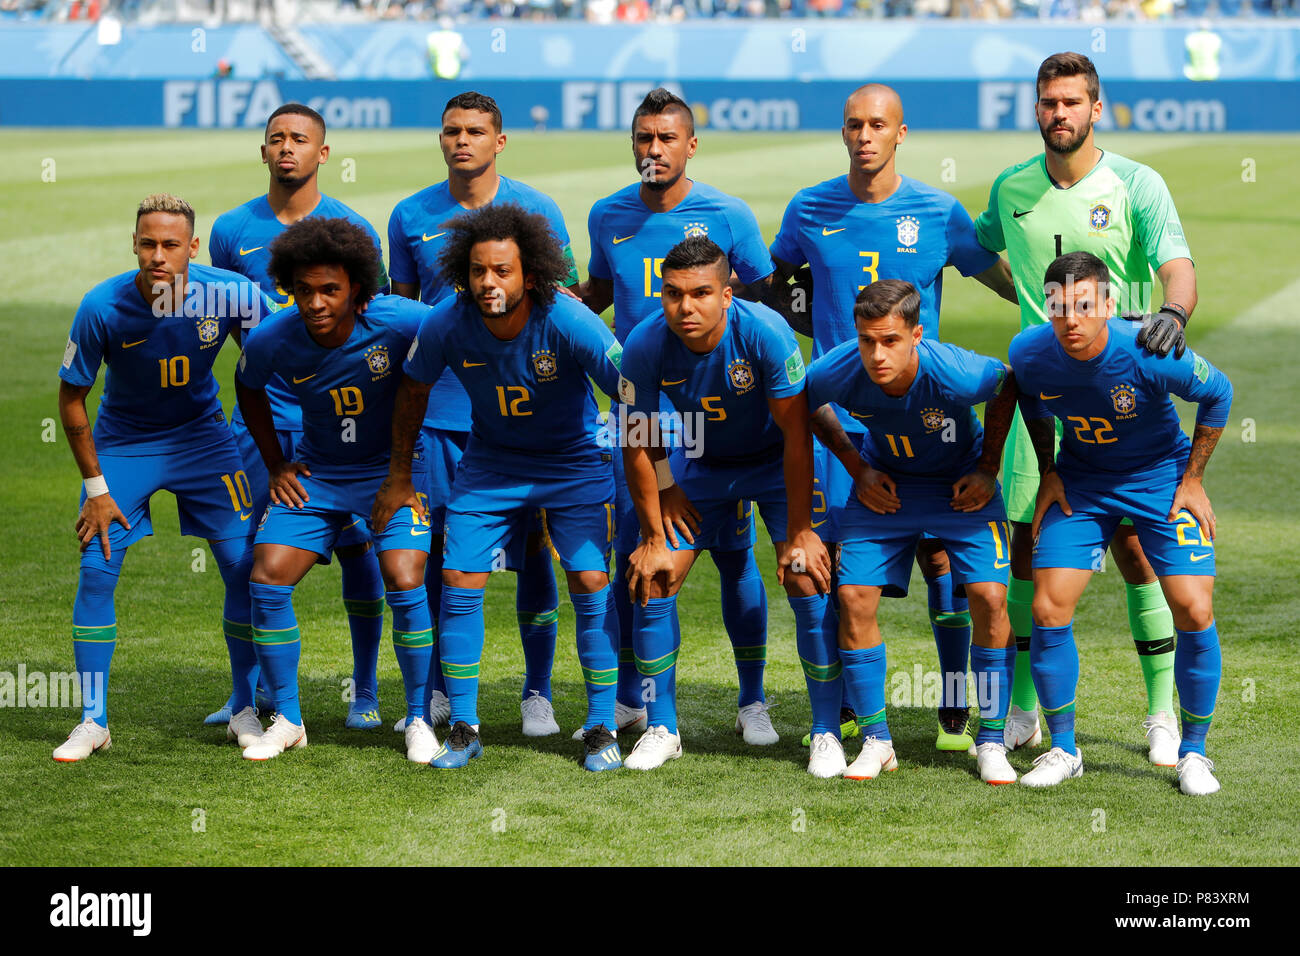 FIFA World Cup 2018 Official squad: Group E – Team 17 – Brazil